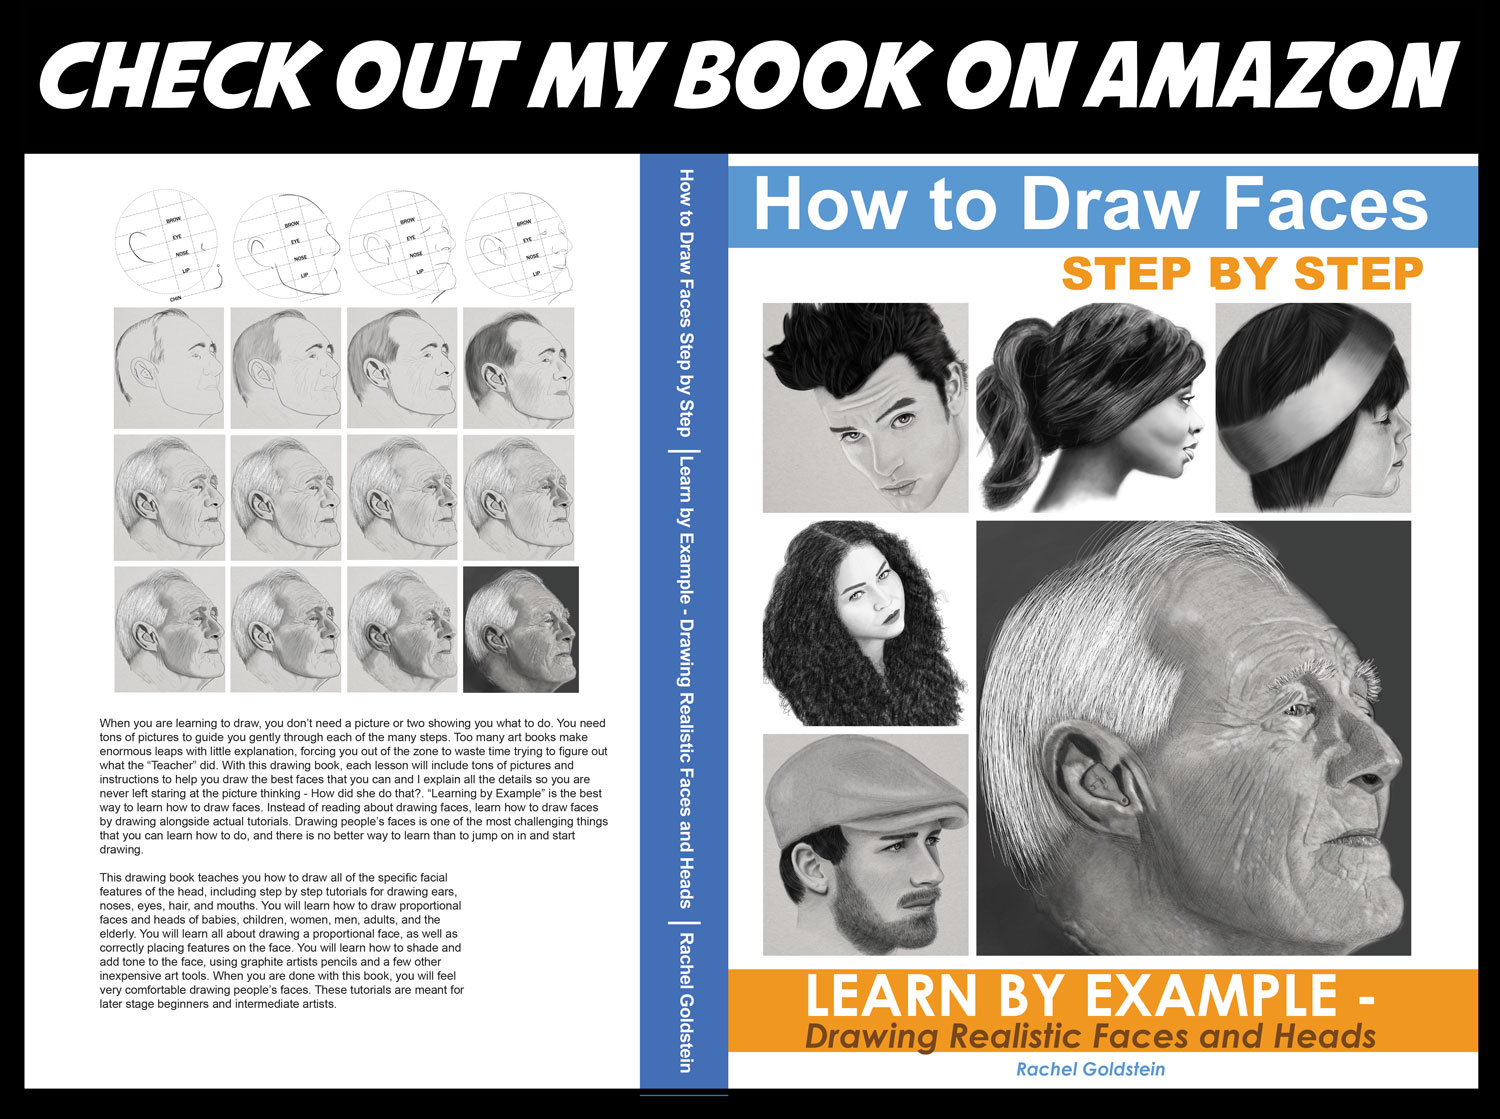 how to draw faces step by step - learn how to draw faces and heads 